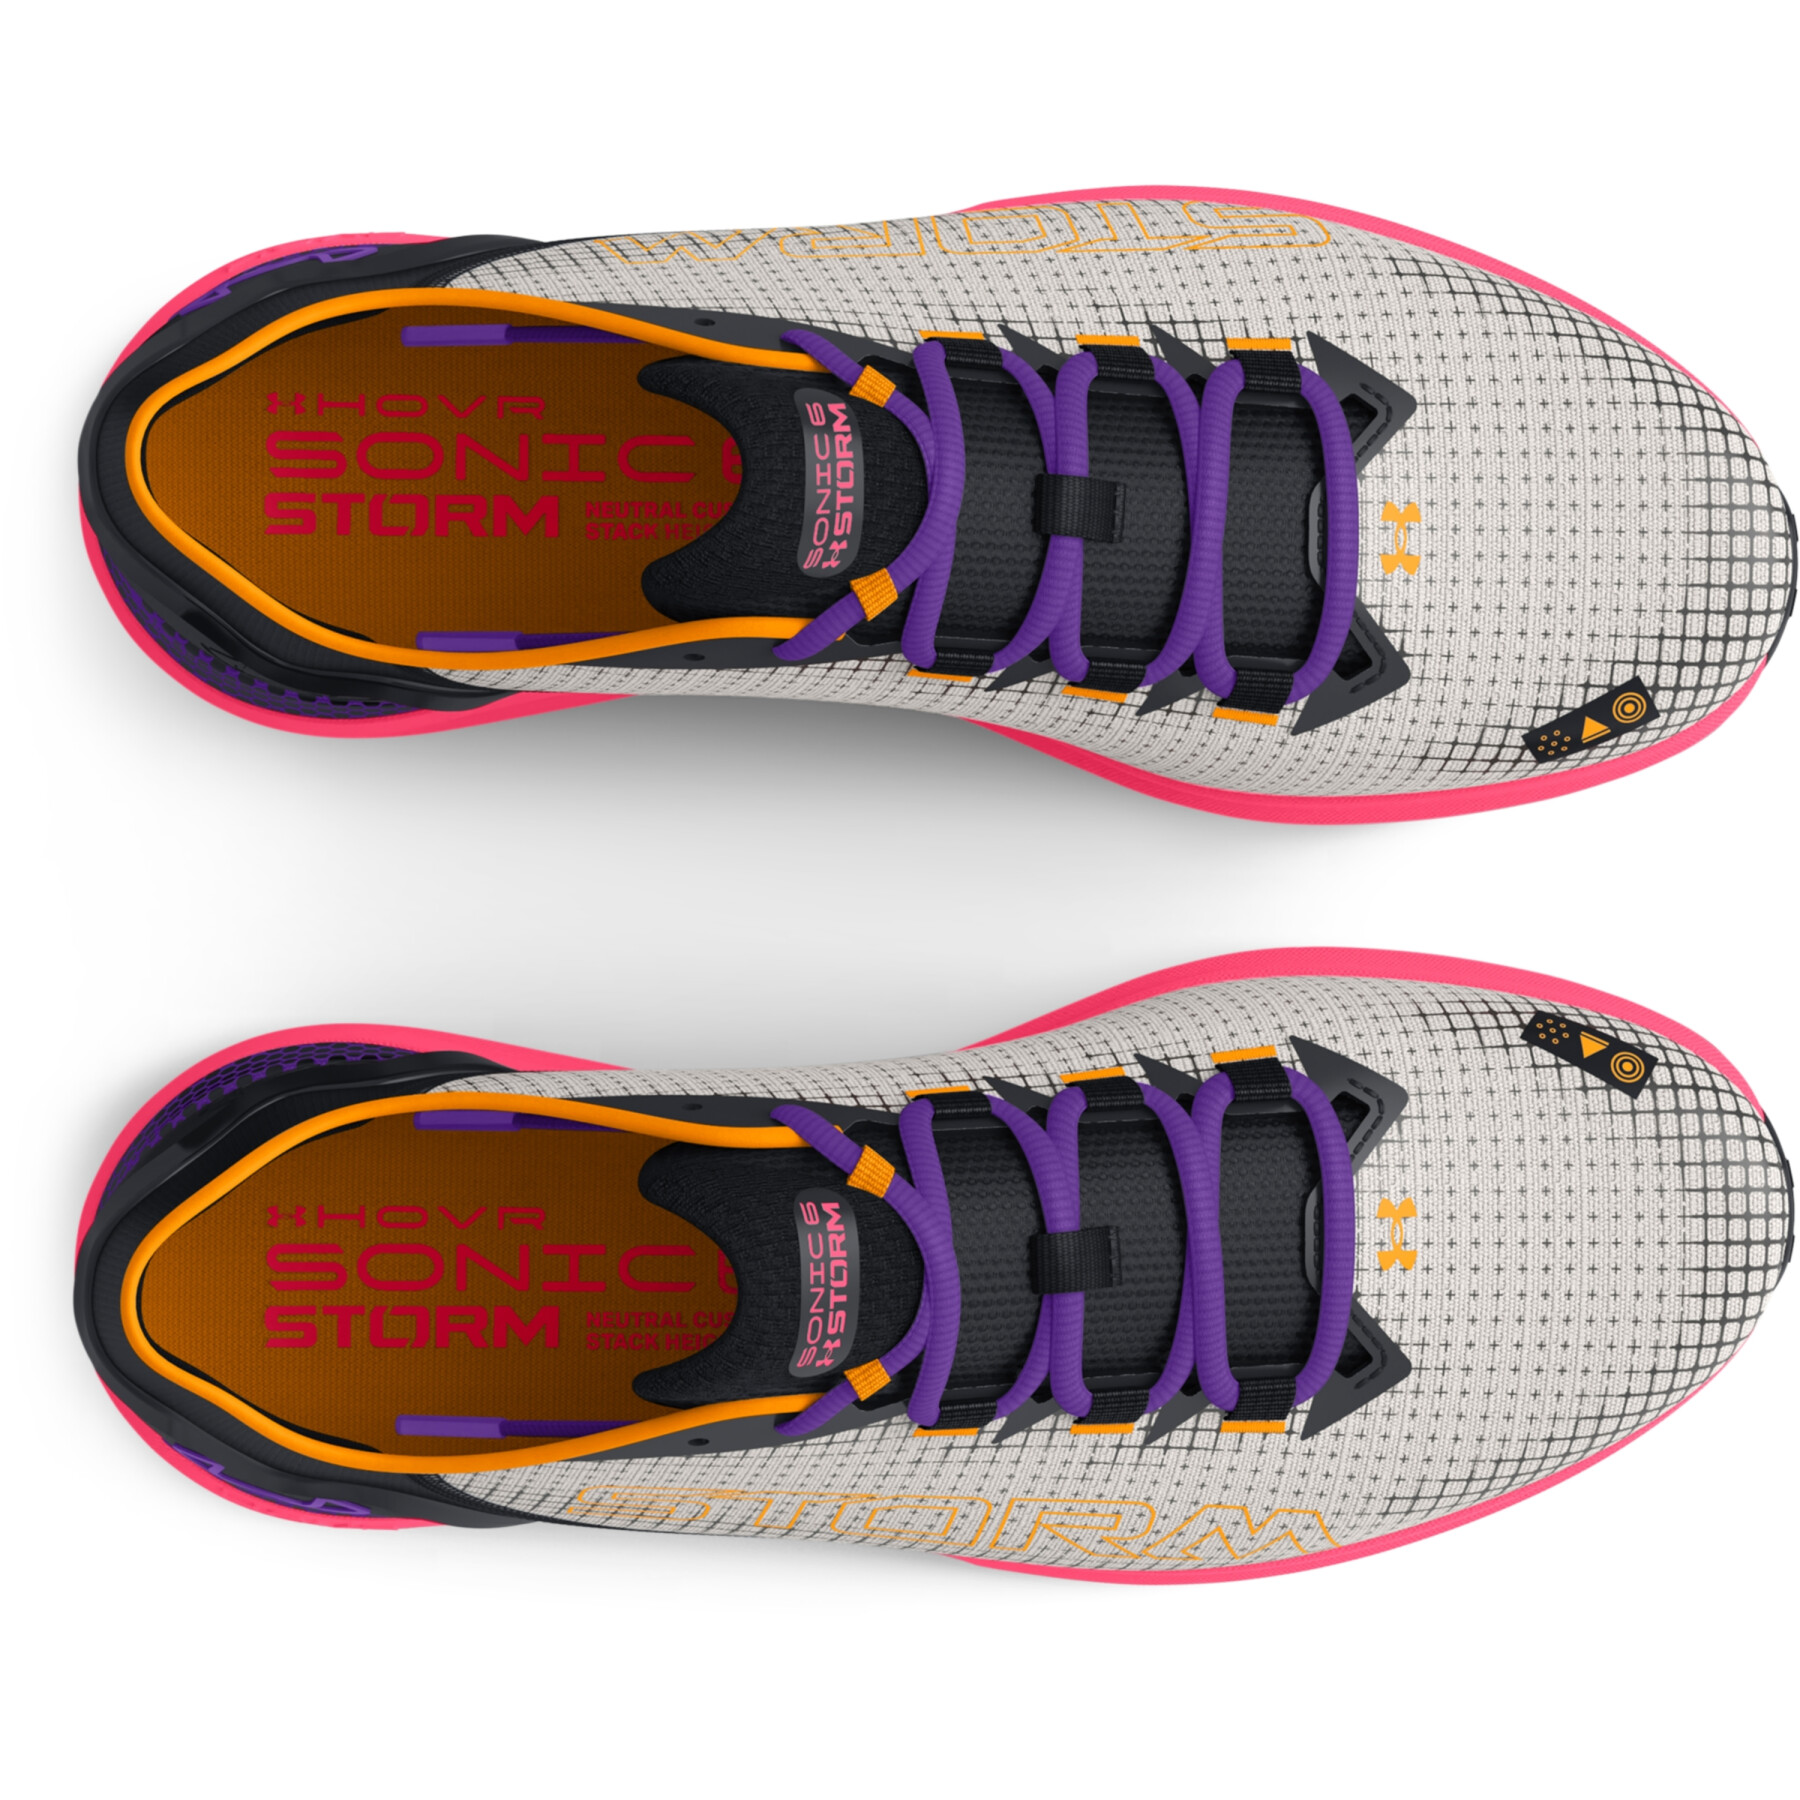 Women's running shoes Under Armour Hovr Sonic 6 Storm